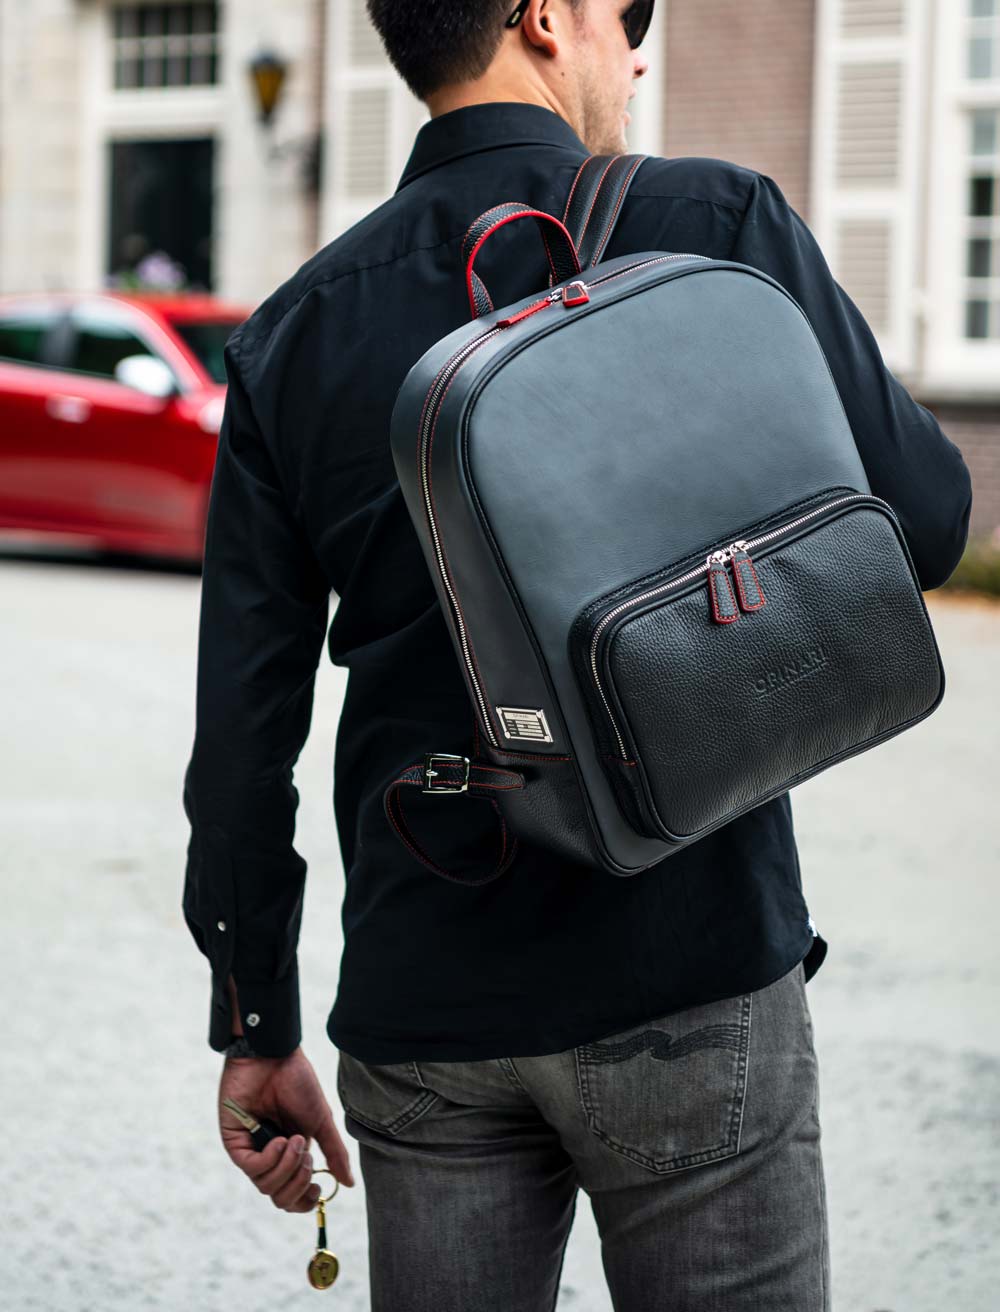 grey black red backpack car related